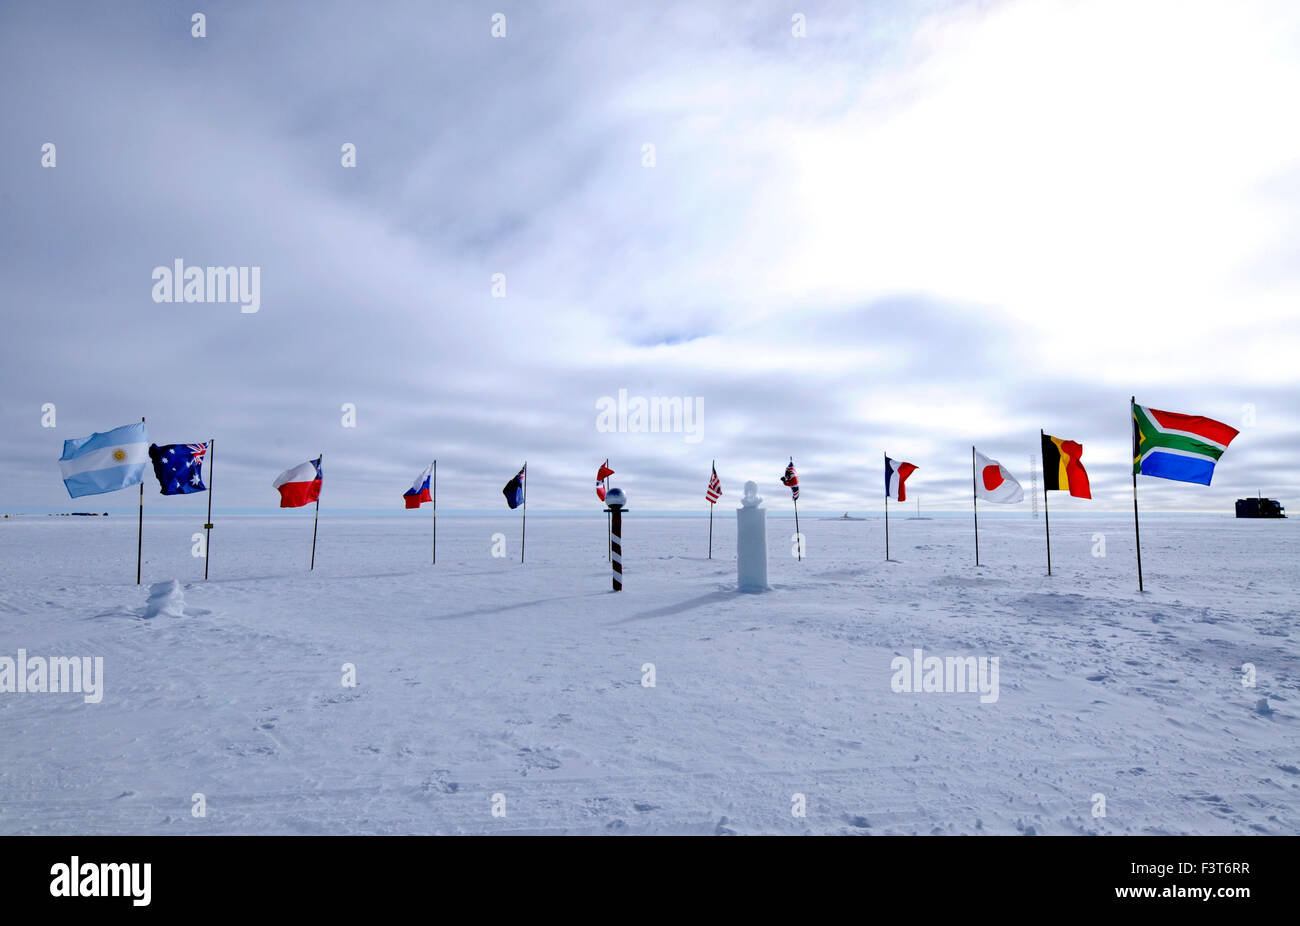 Flags of original signatory nations of the Antarctic Treaty at the South Pole, Antarctica Stock Photo